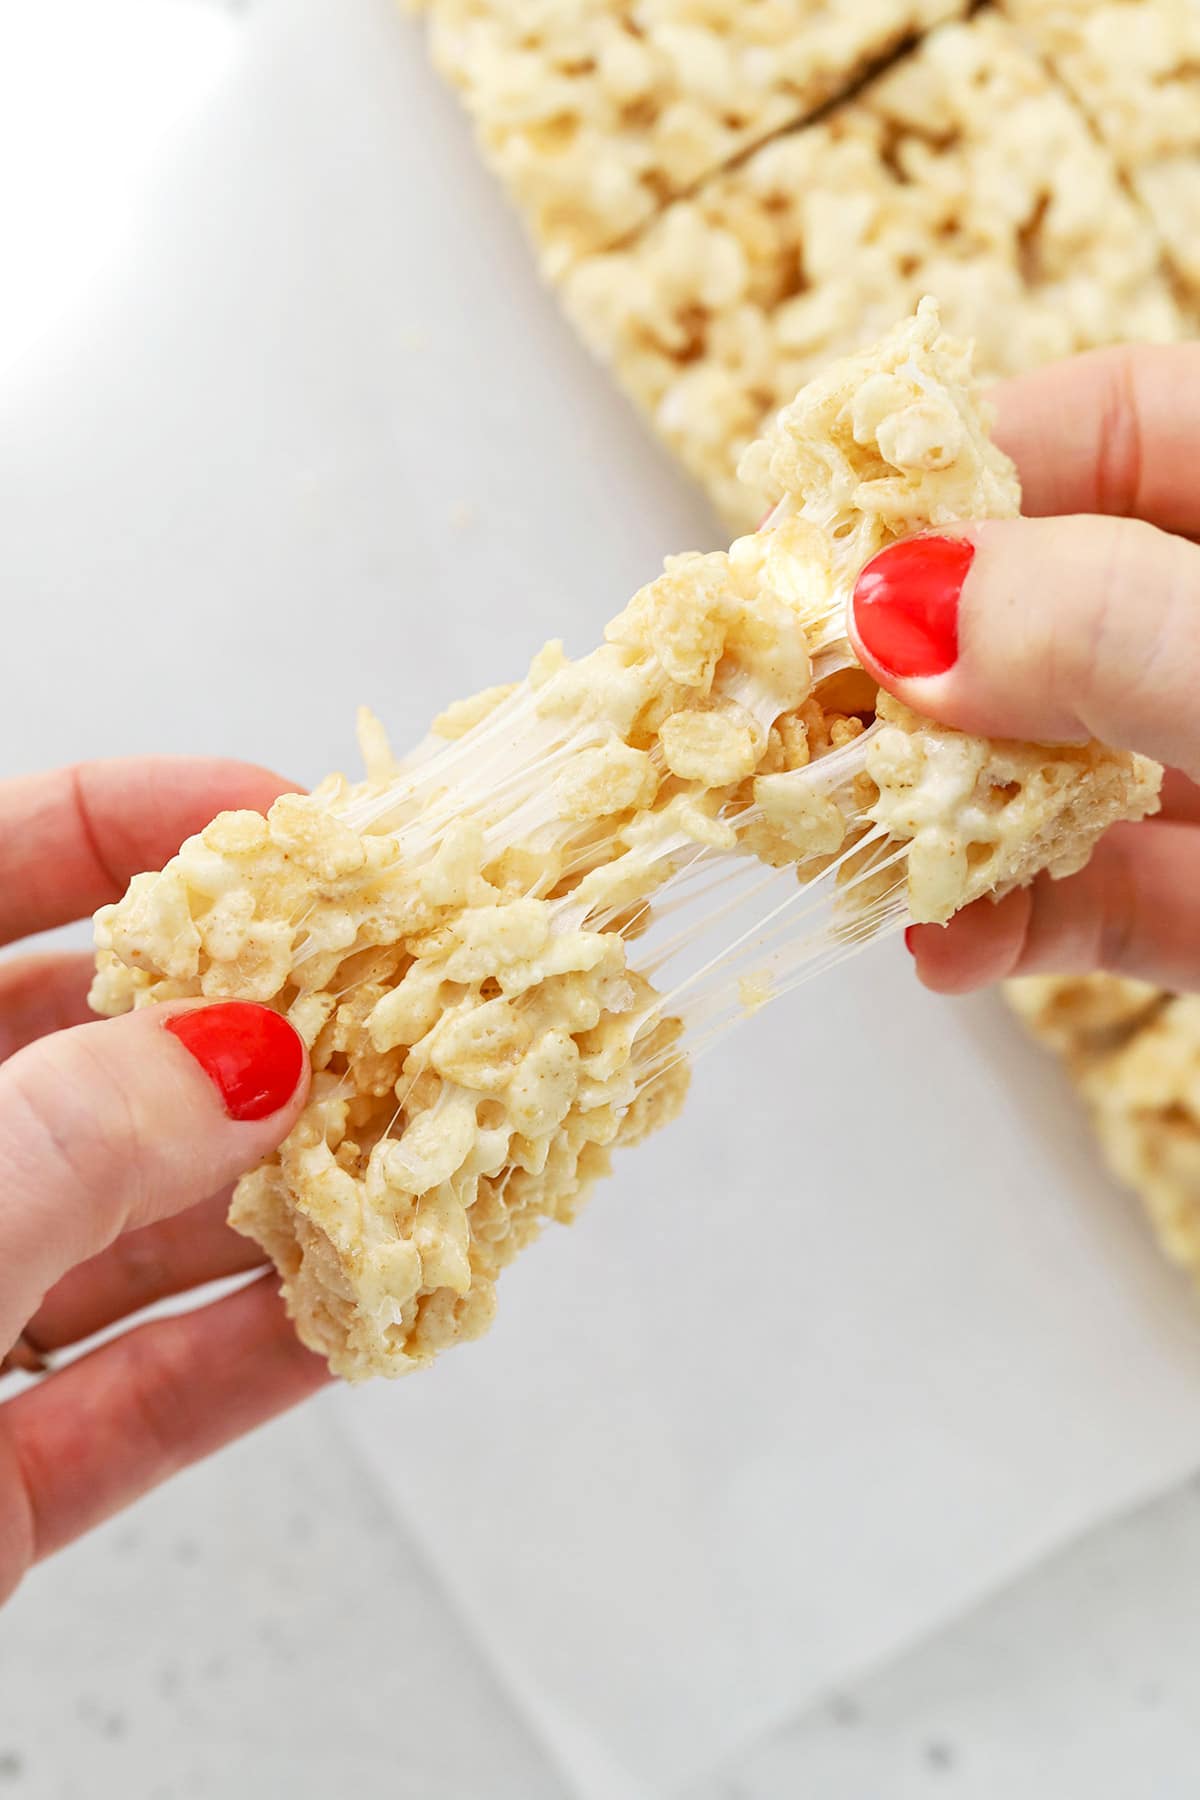 Pulling apart a gluten-free rice krispies treat, showing the gooey texture